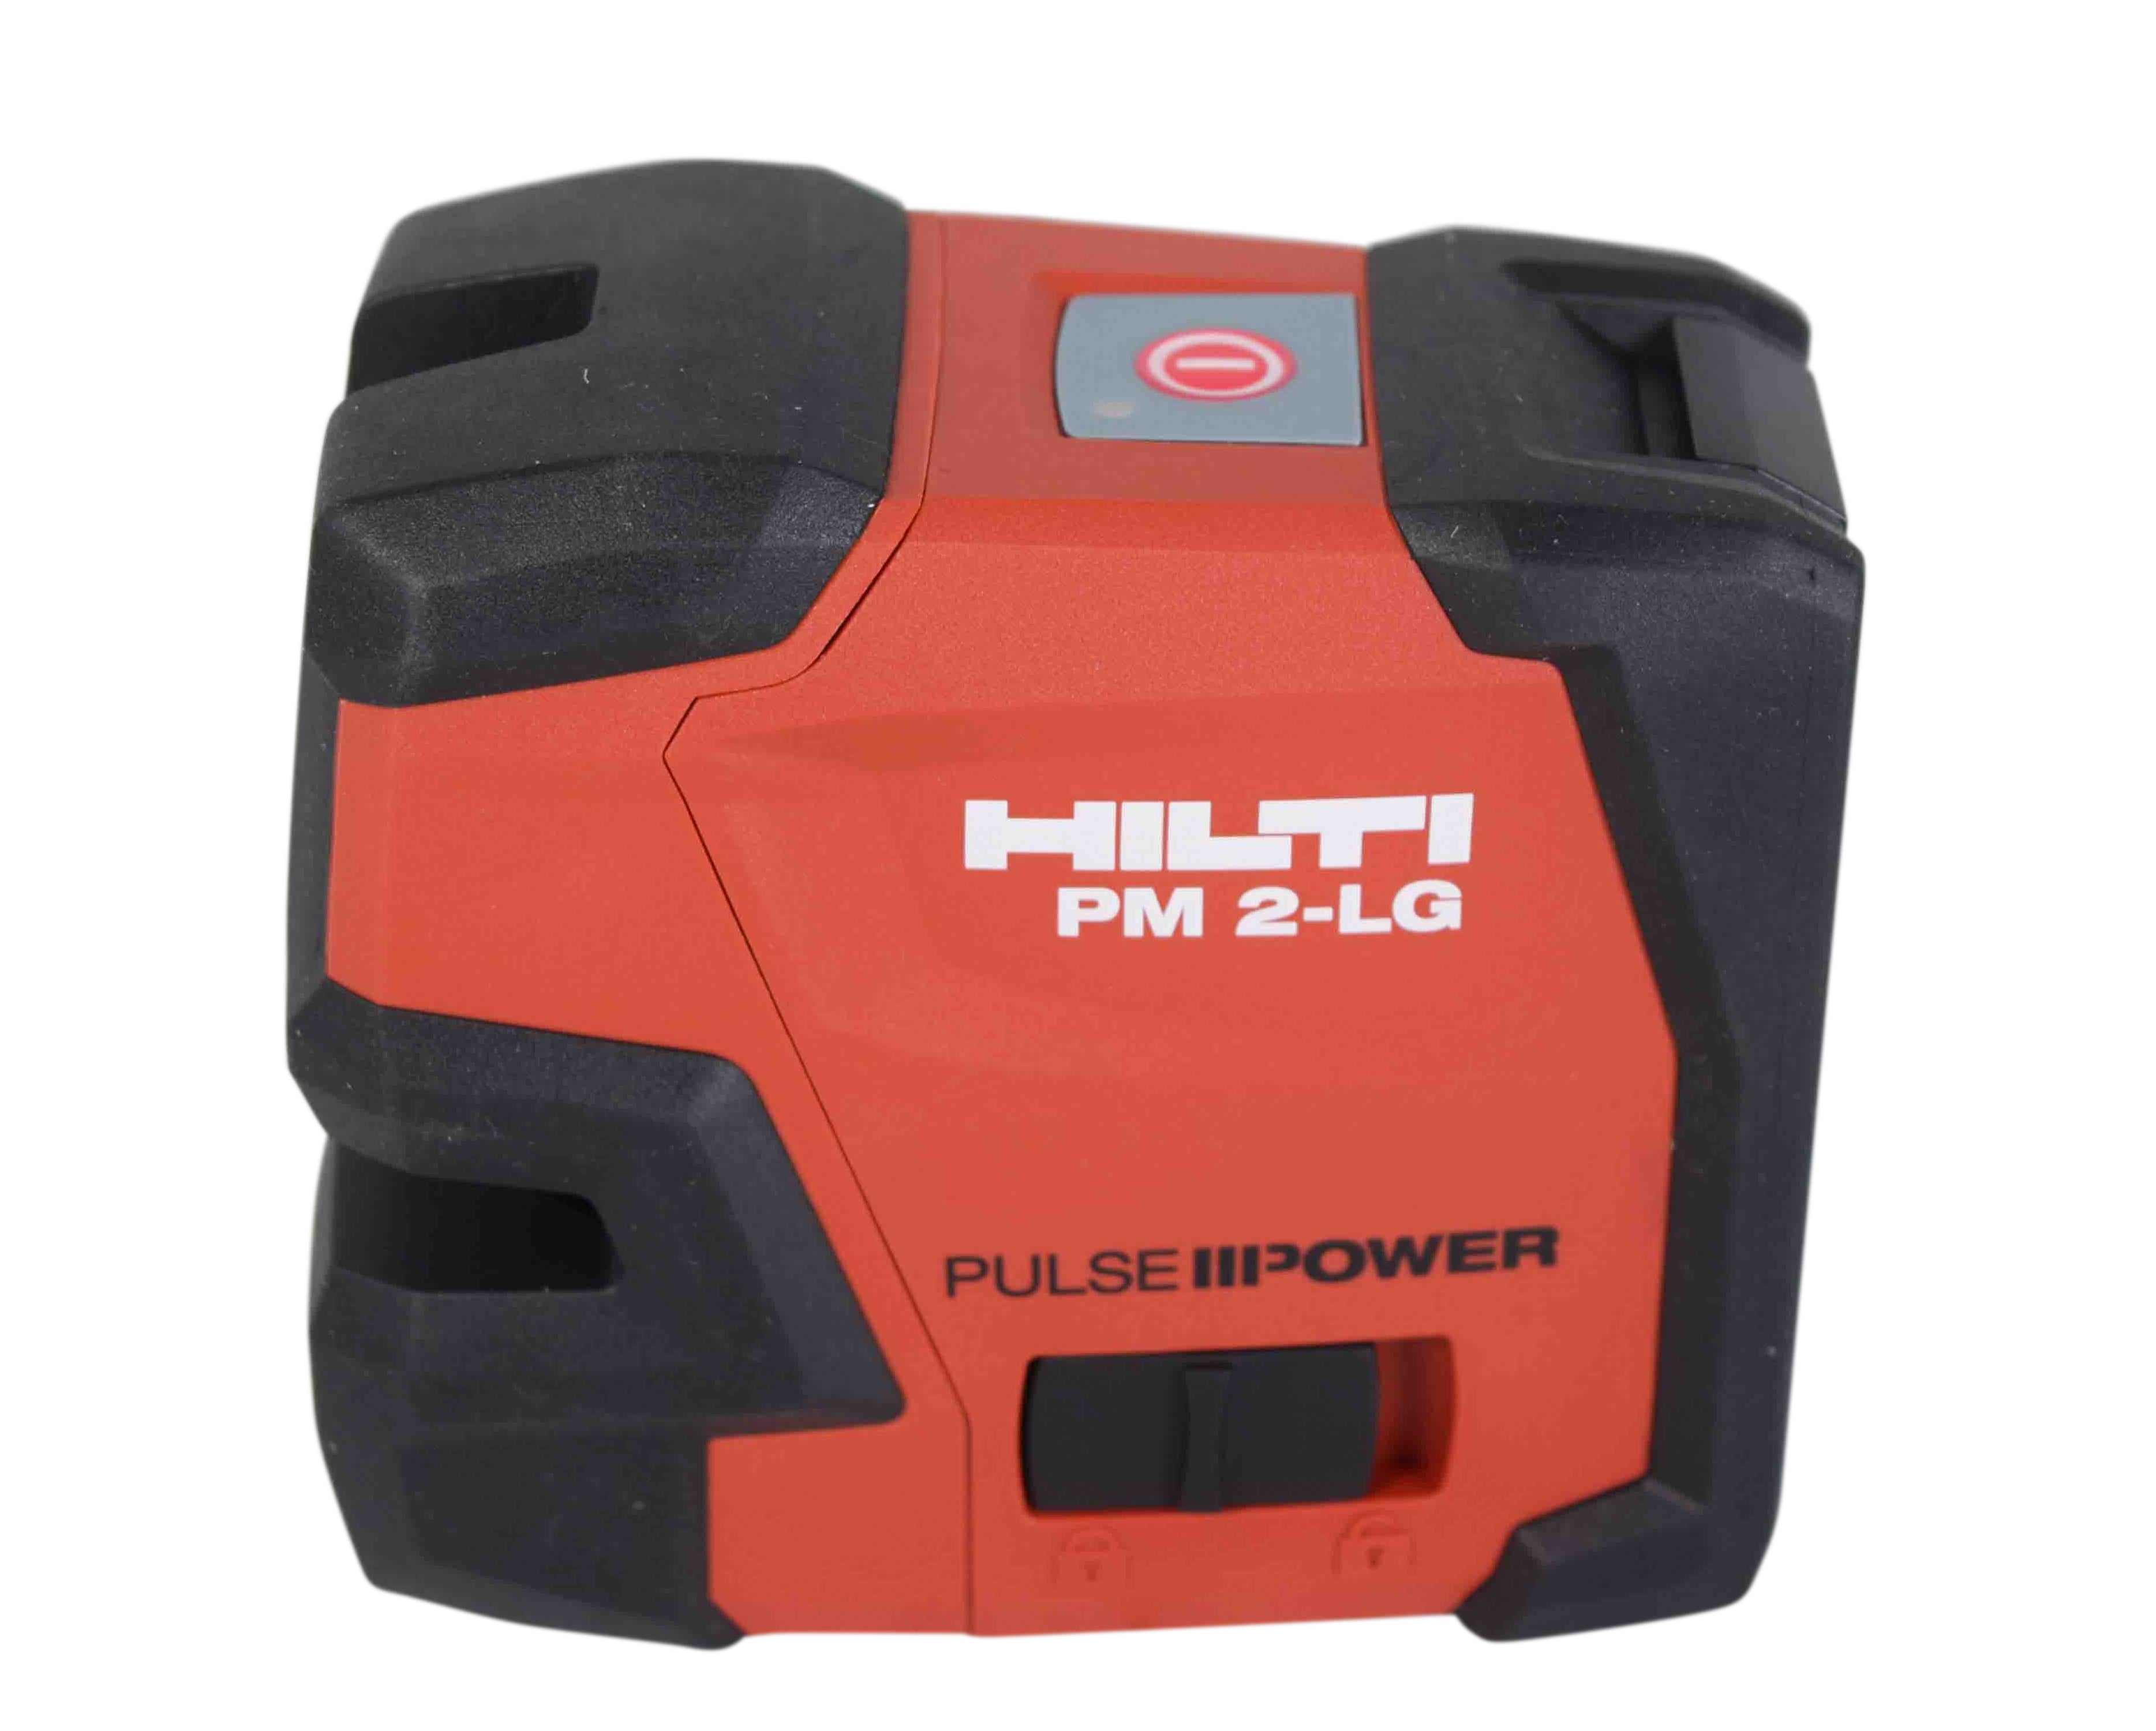 Hilti PM 2-LG Green Beam Line Laser Level Compact and efficient design